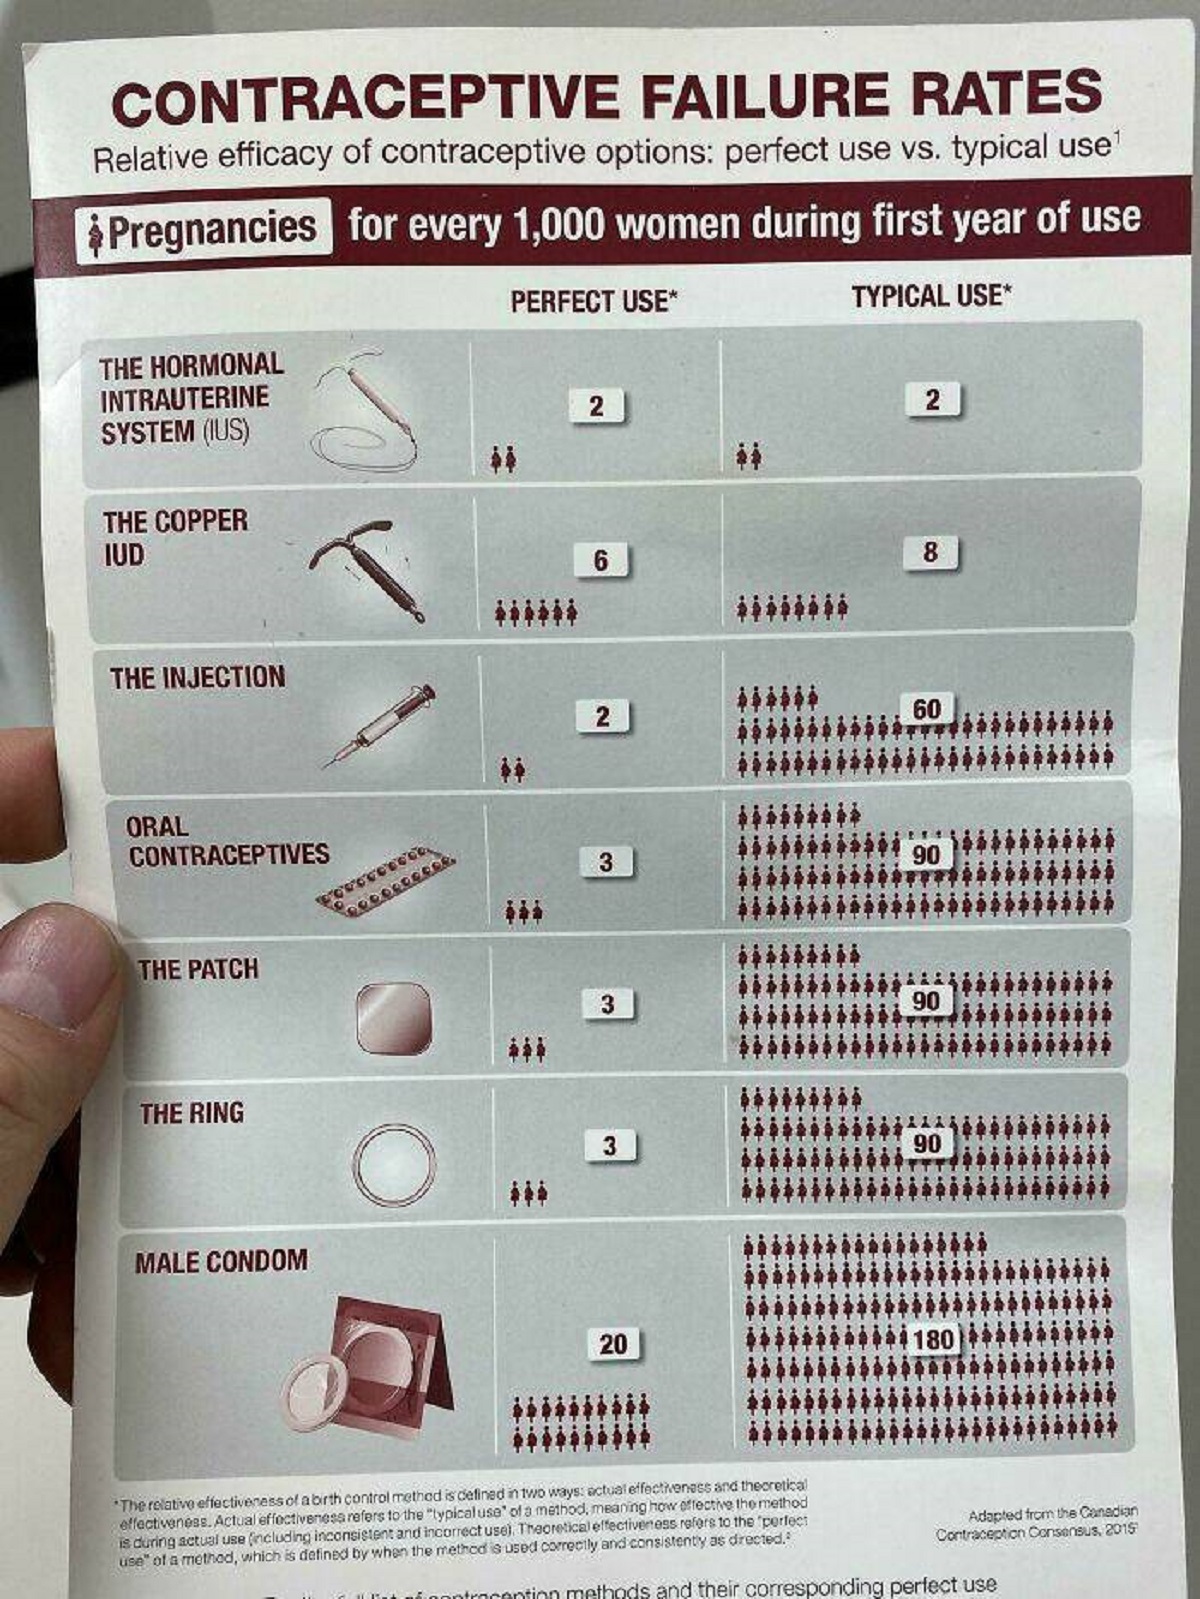 "At The Doctor’s Office I Noticed This Pamphlet On Contraceptive Failure Rates"